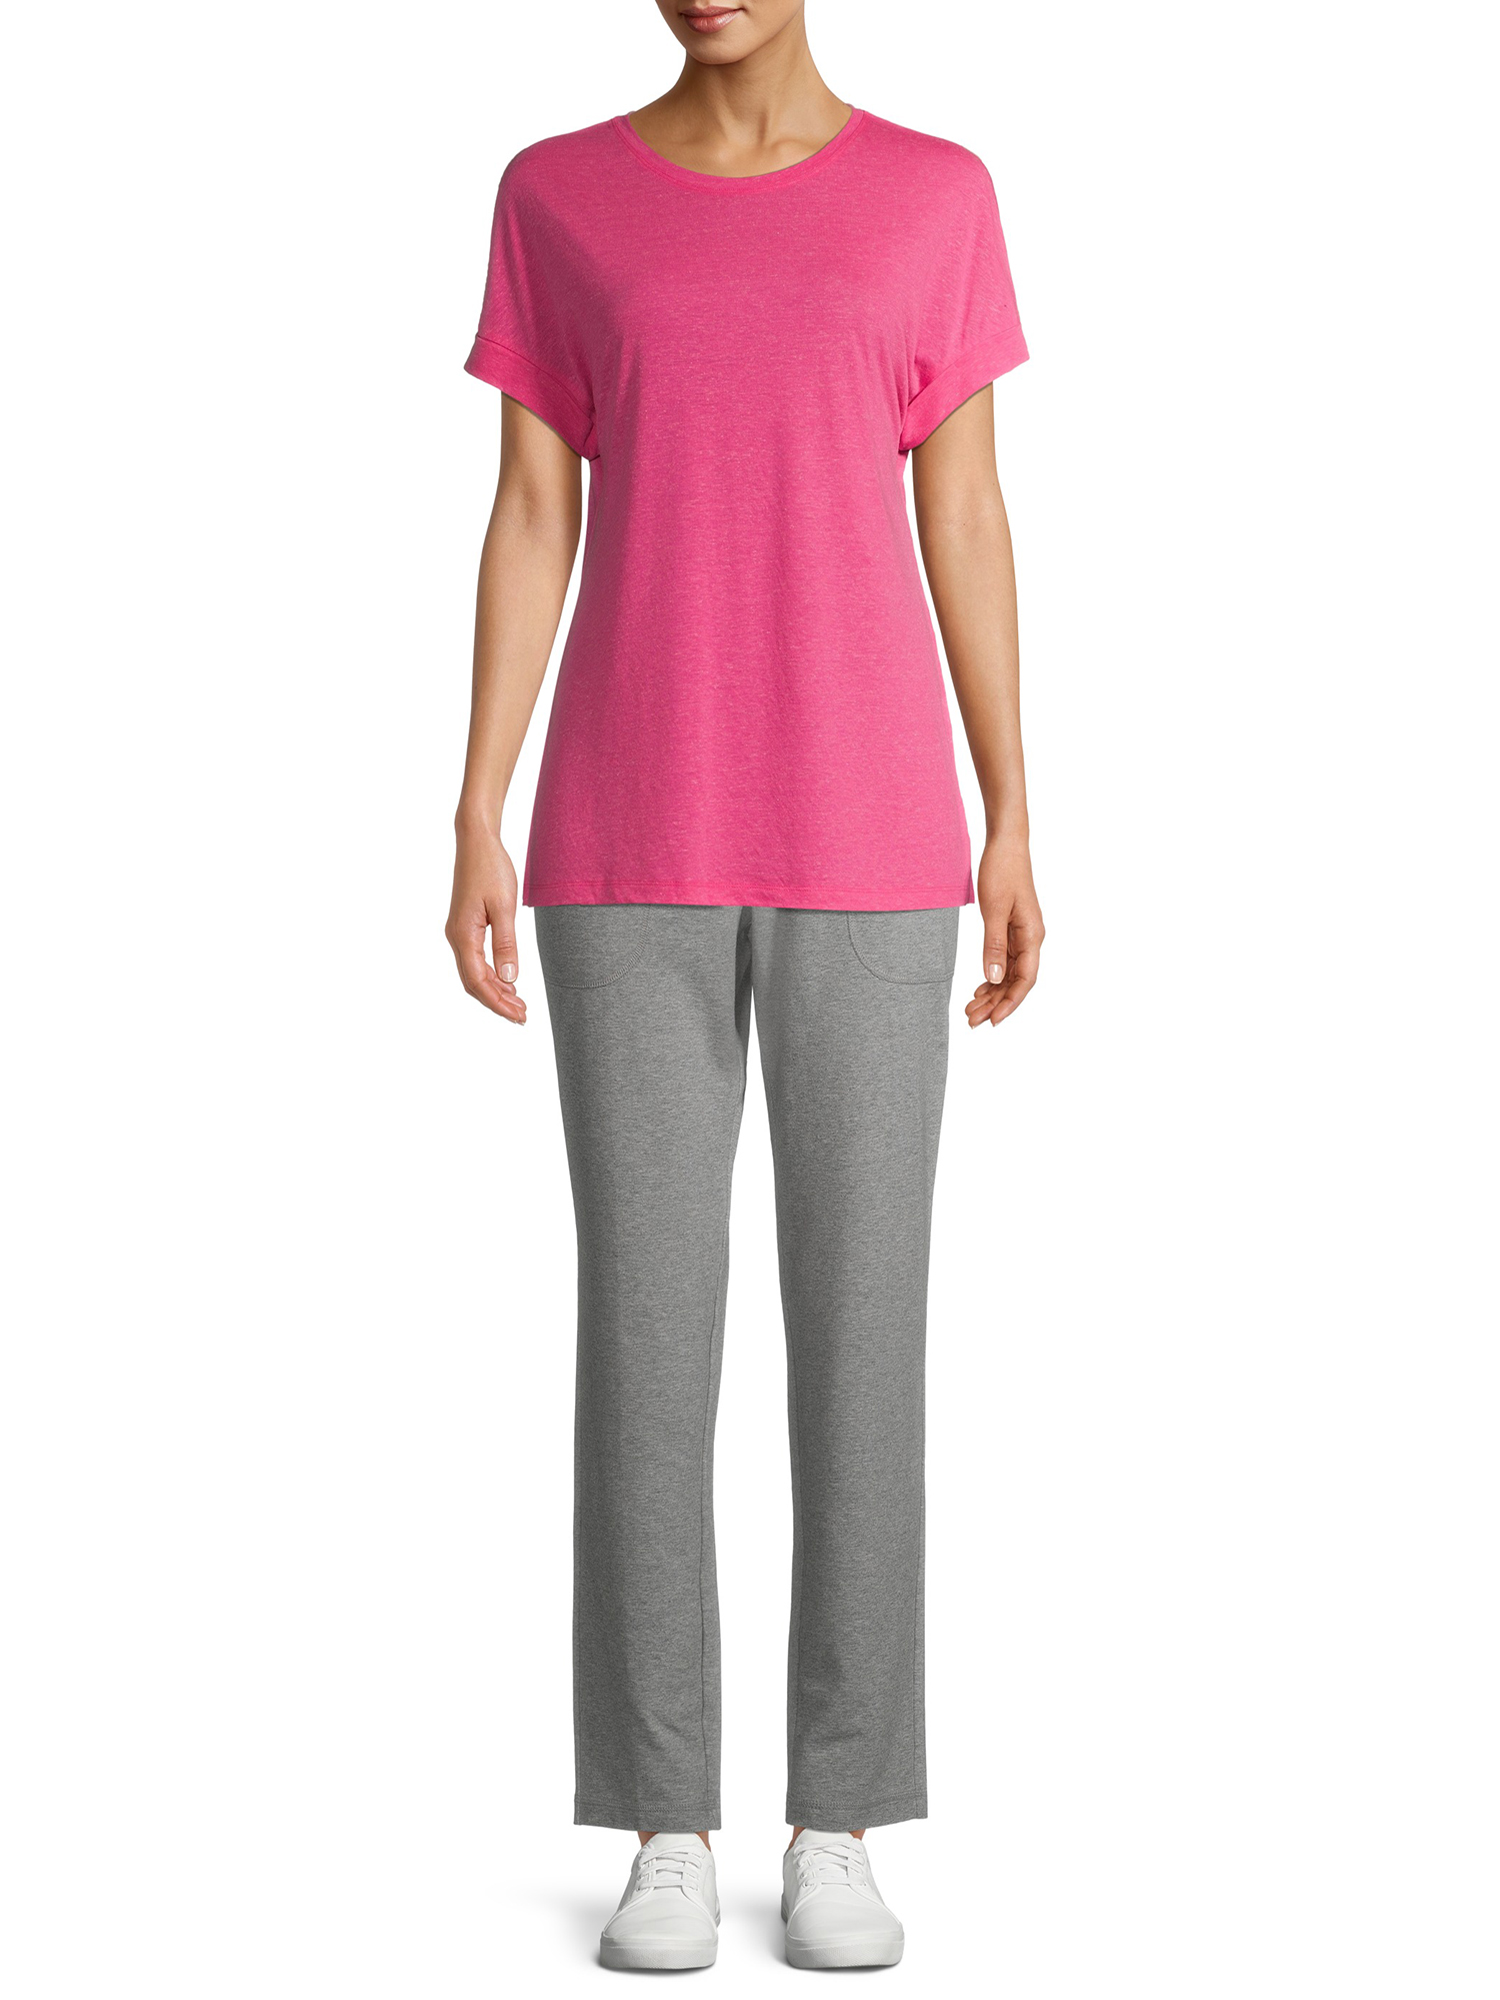 Athletic Works Women's Athleisure Core Knit Pants Available in Regular and Petite - image 2 of 6